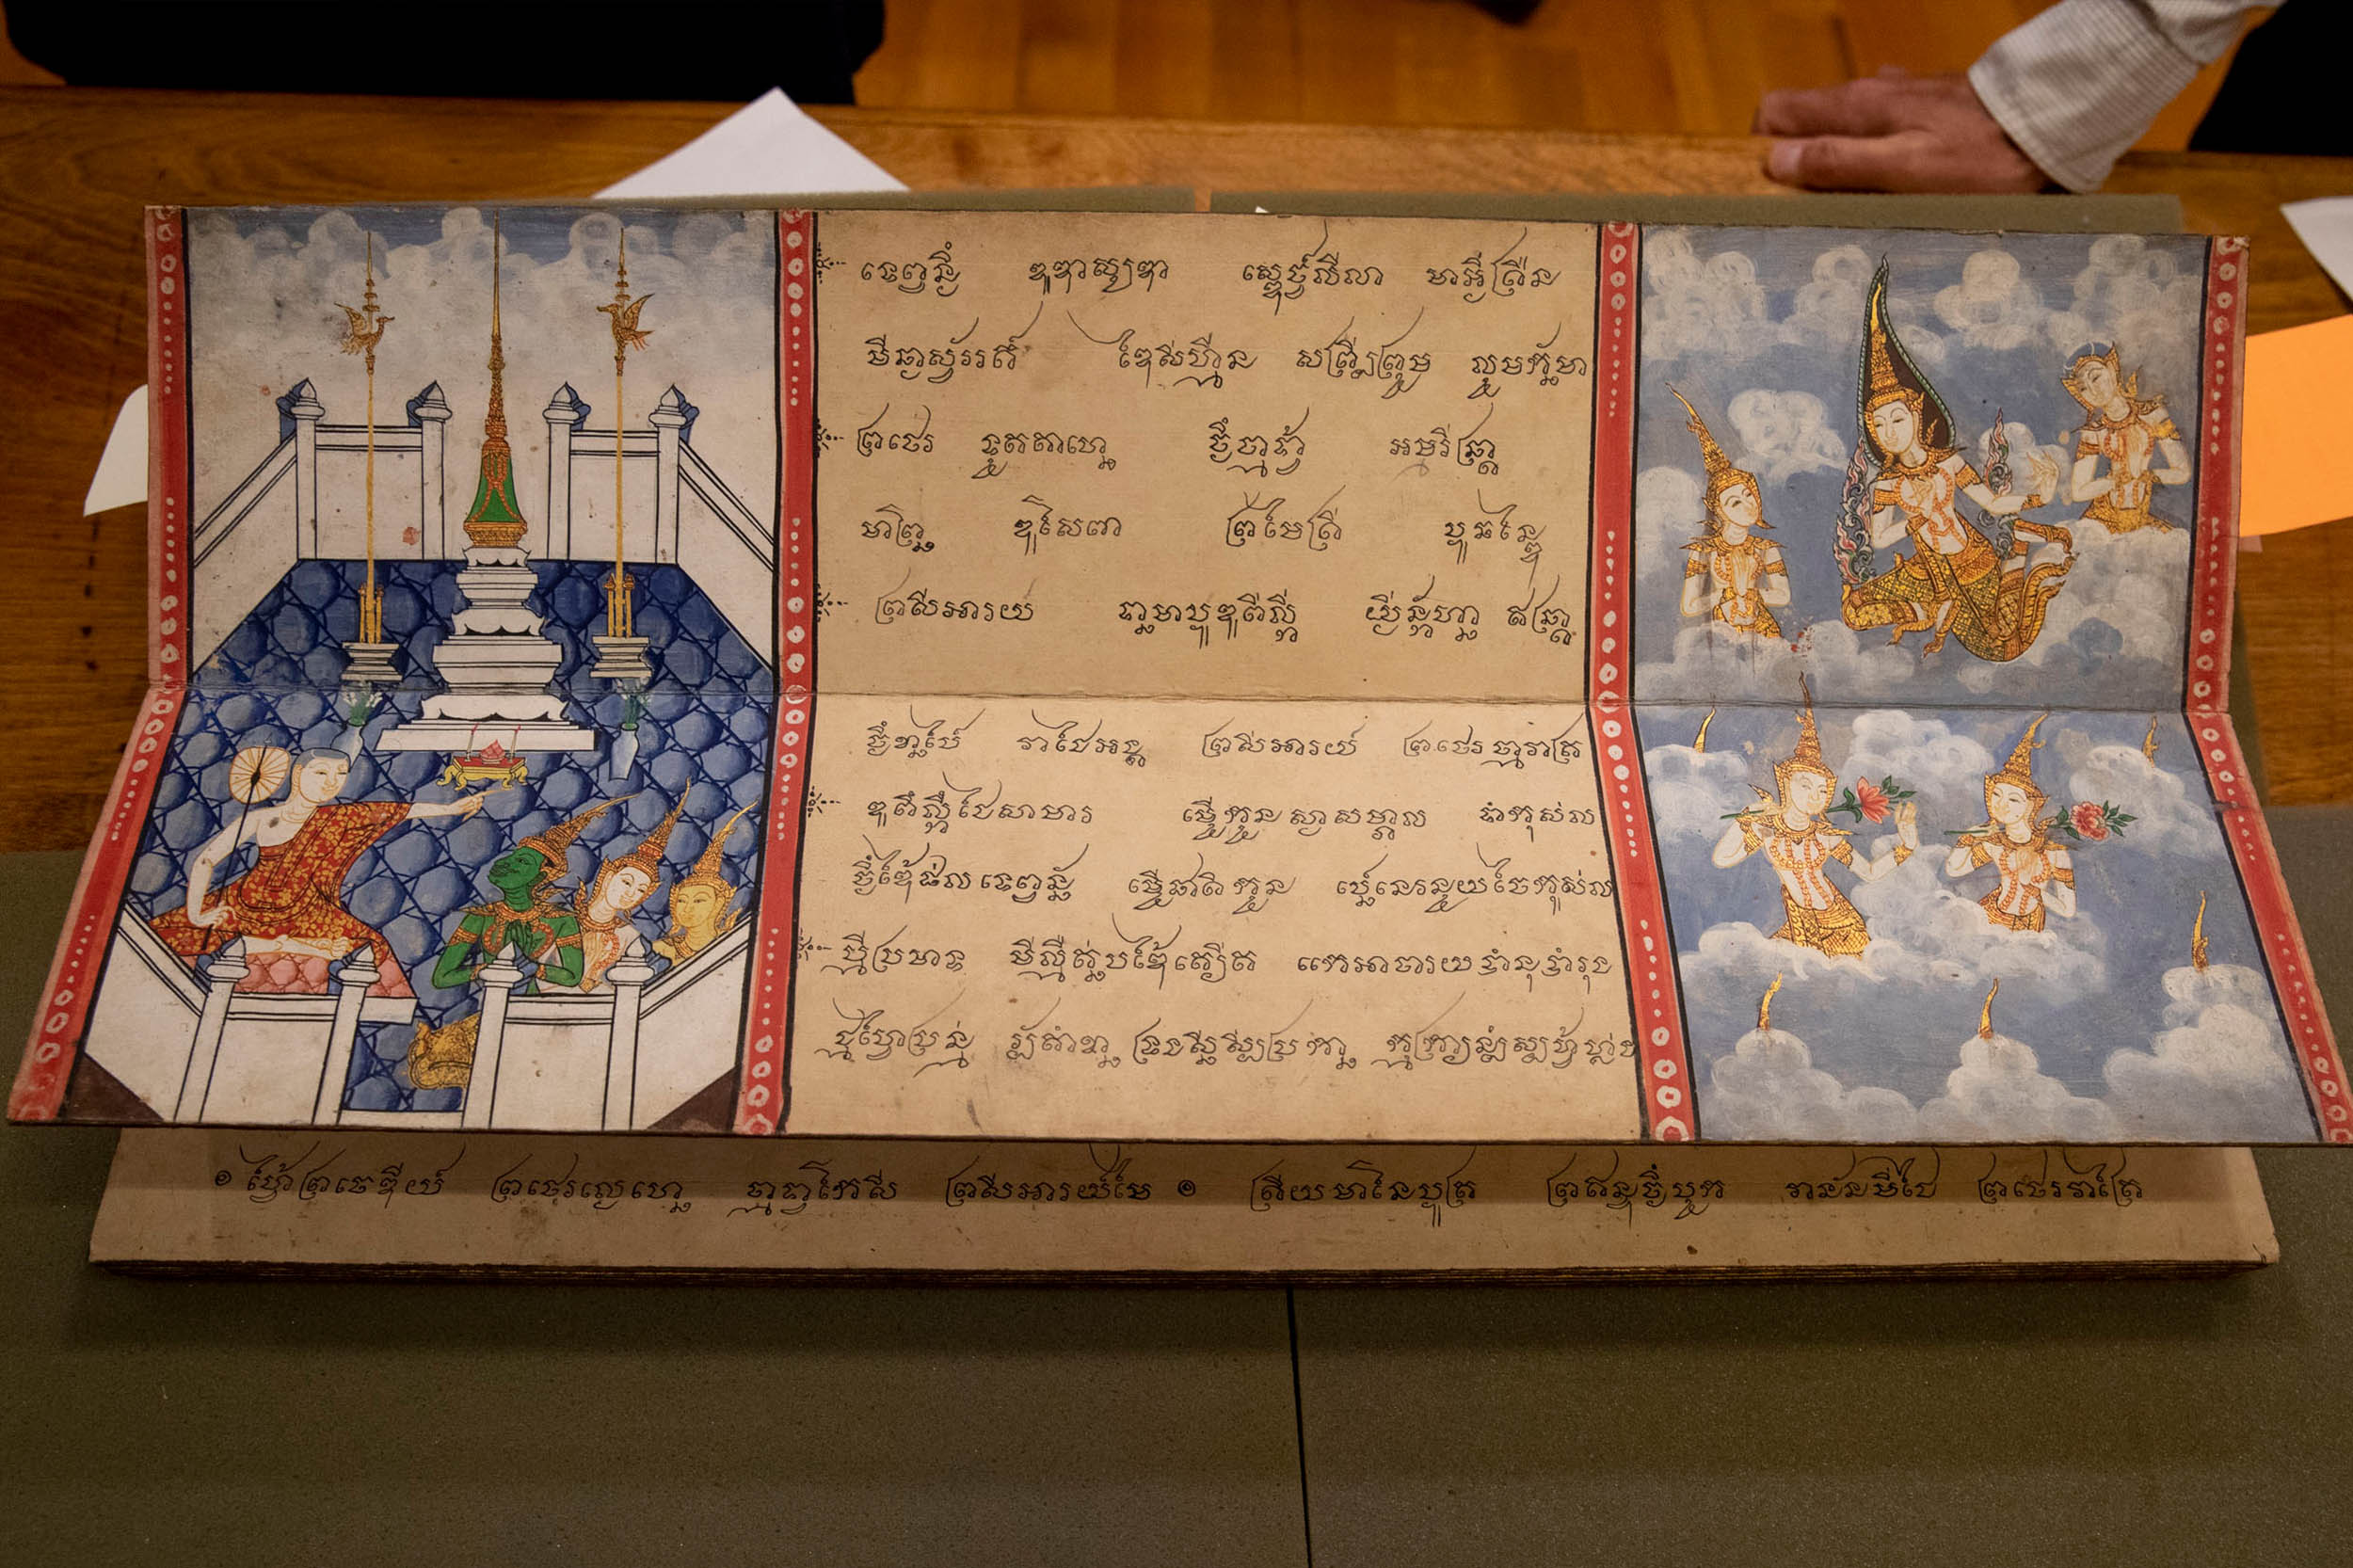 a book that folds out.  Left: Monks sitting on the floor of a temple  Middle: Text in a foreign language right: Monks on clouds in the air